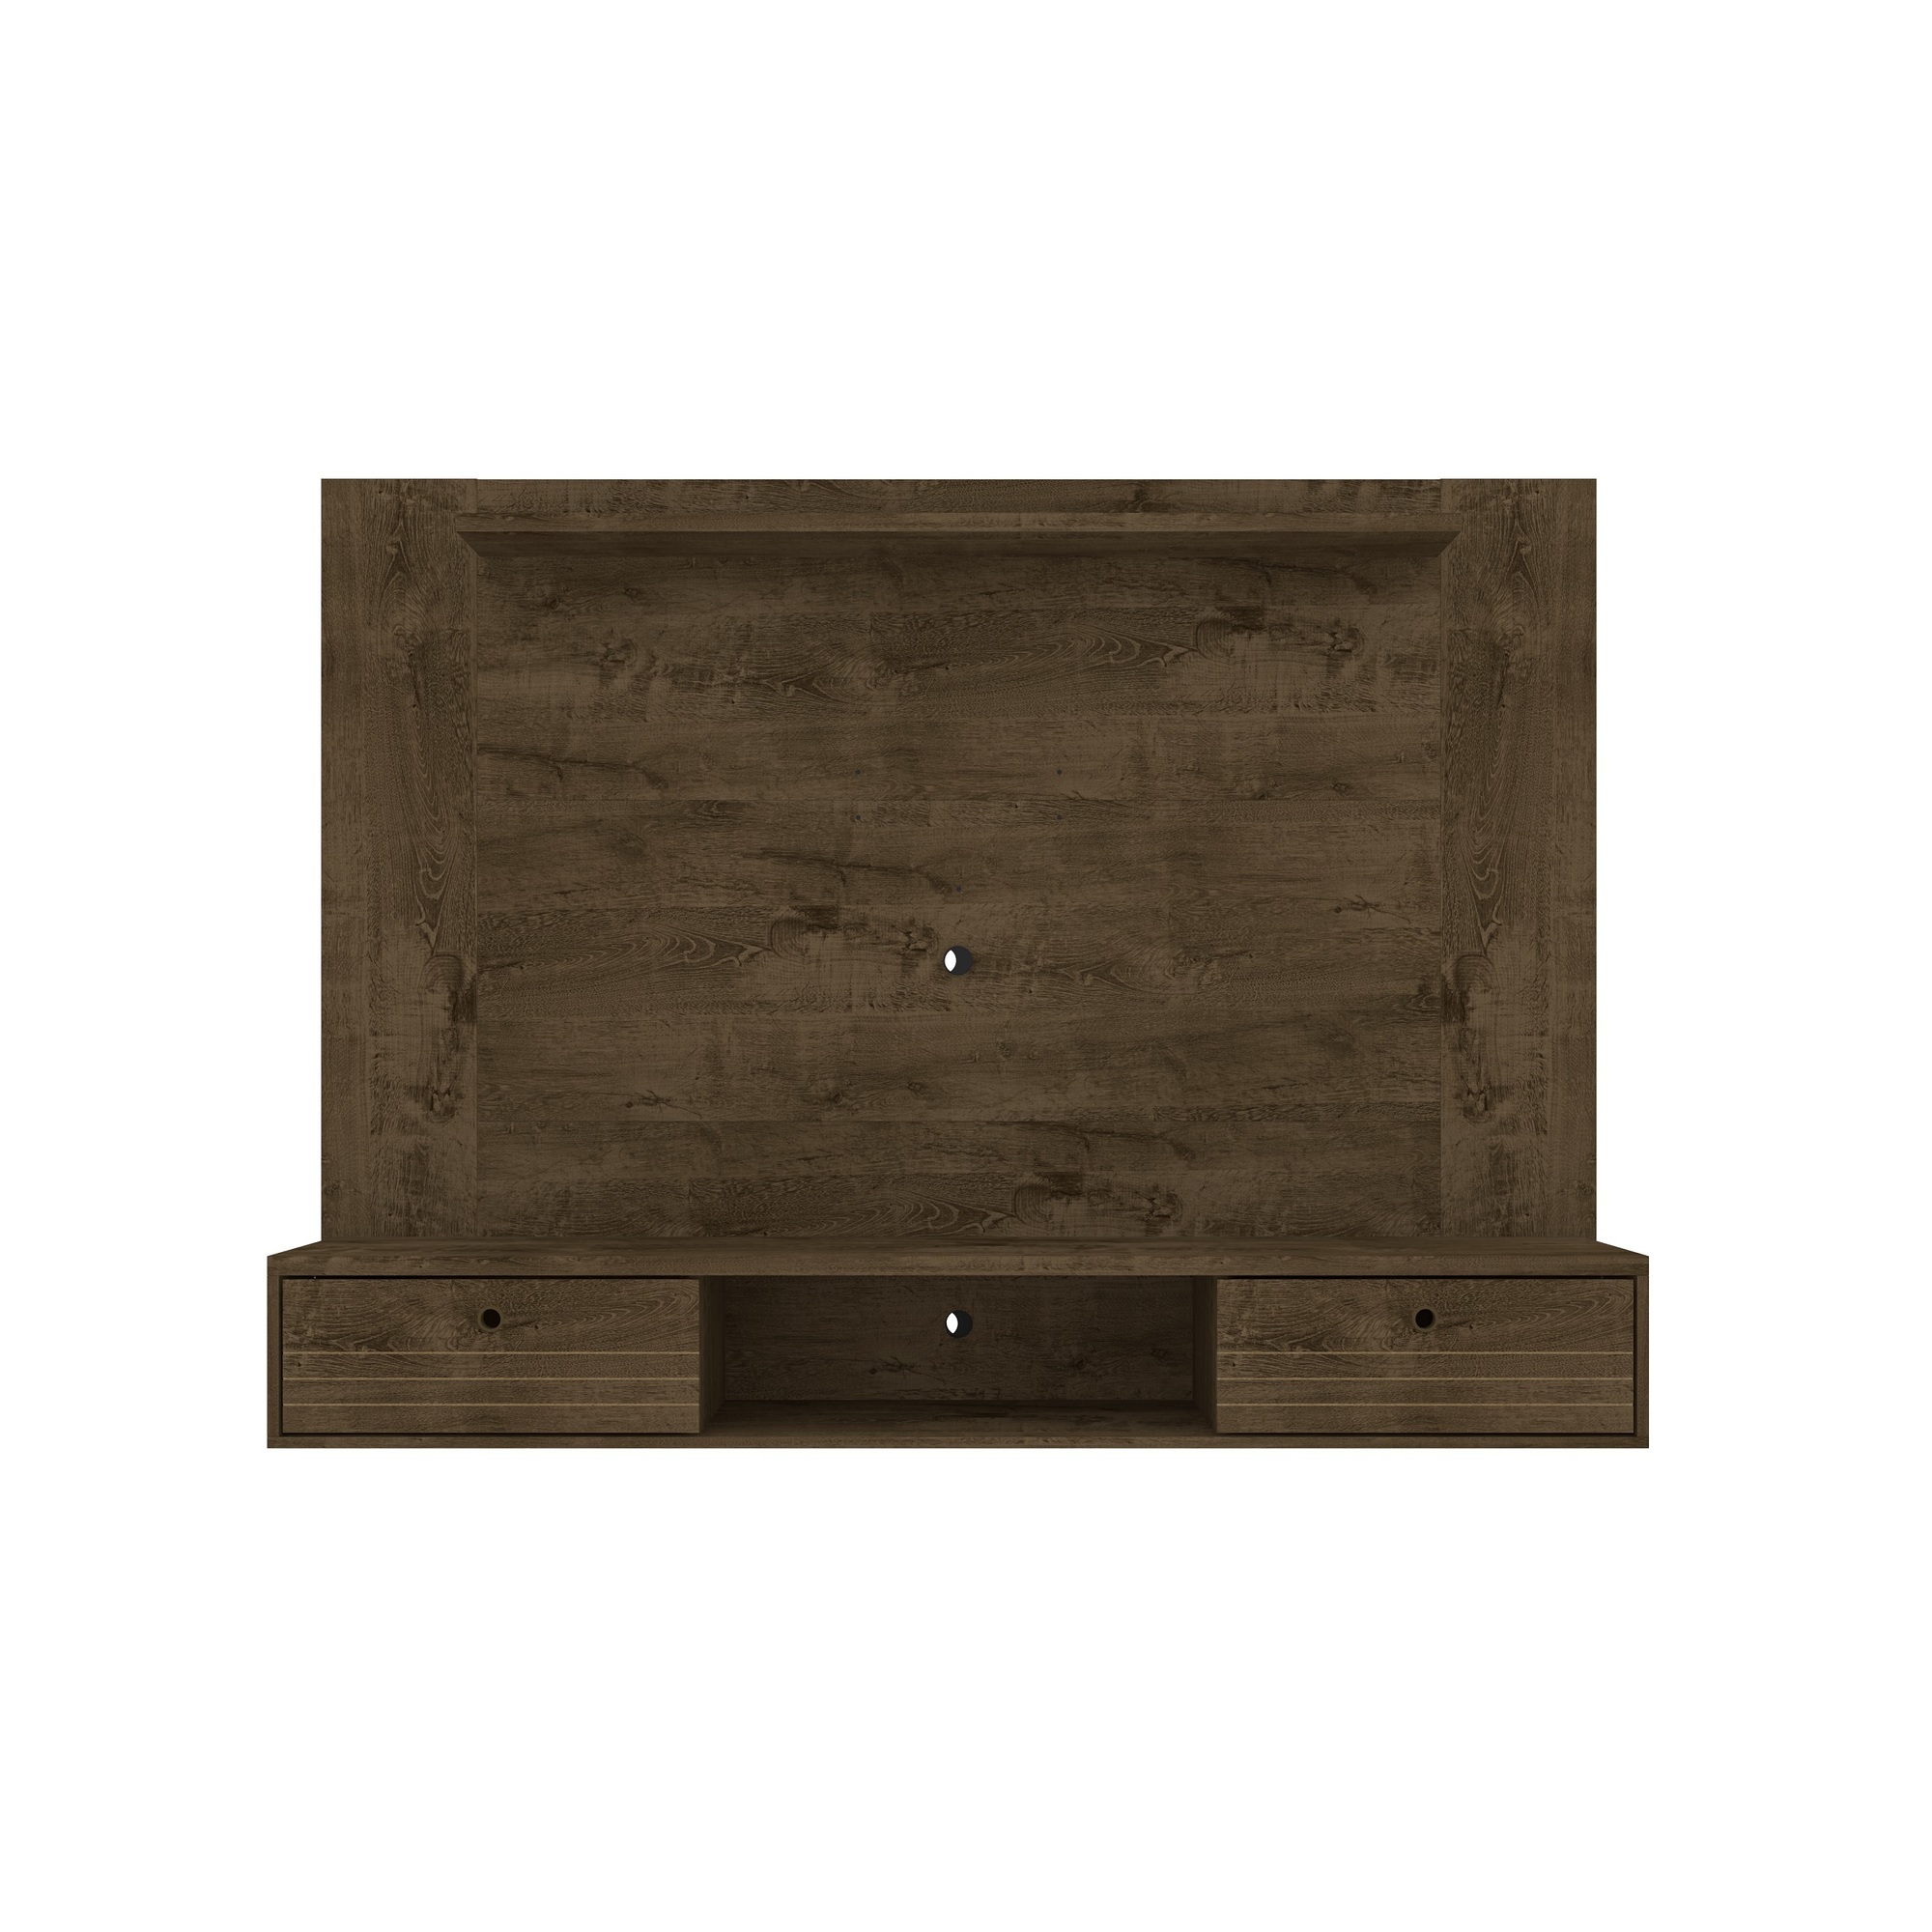 Manhattan Comfort, Liberty 70.86 Floating Wall Ent Cntr Brown, Width 70.86 in, Height 52.95 in, Depth 12.99 in, Model 235BMC